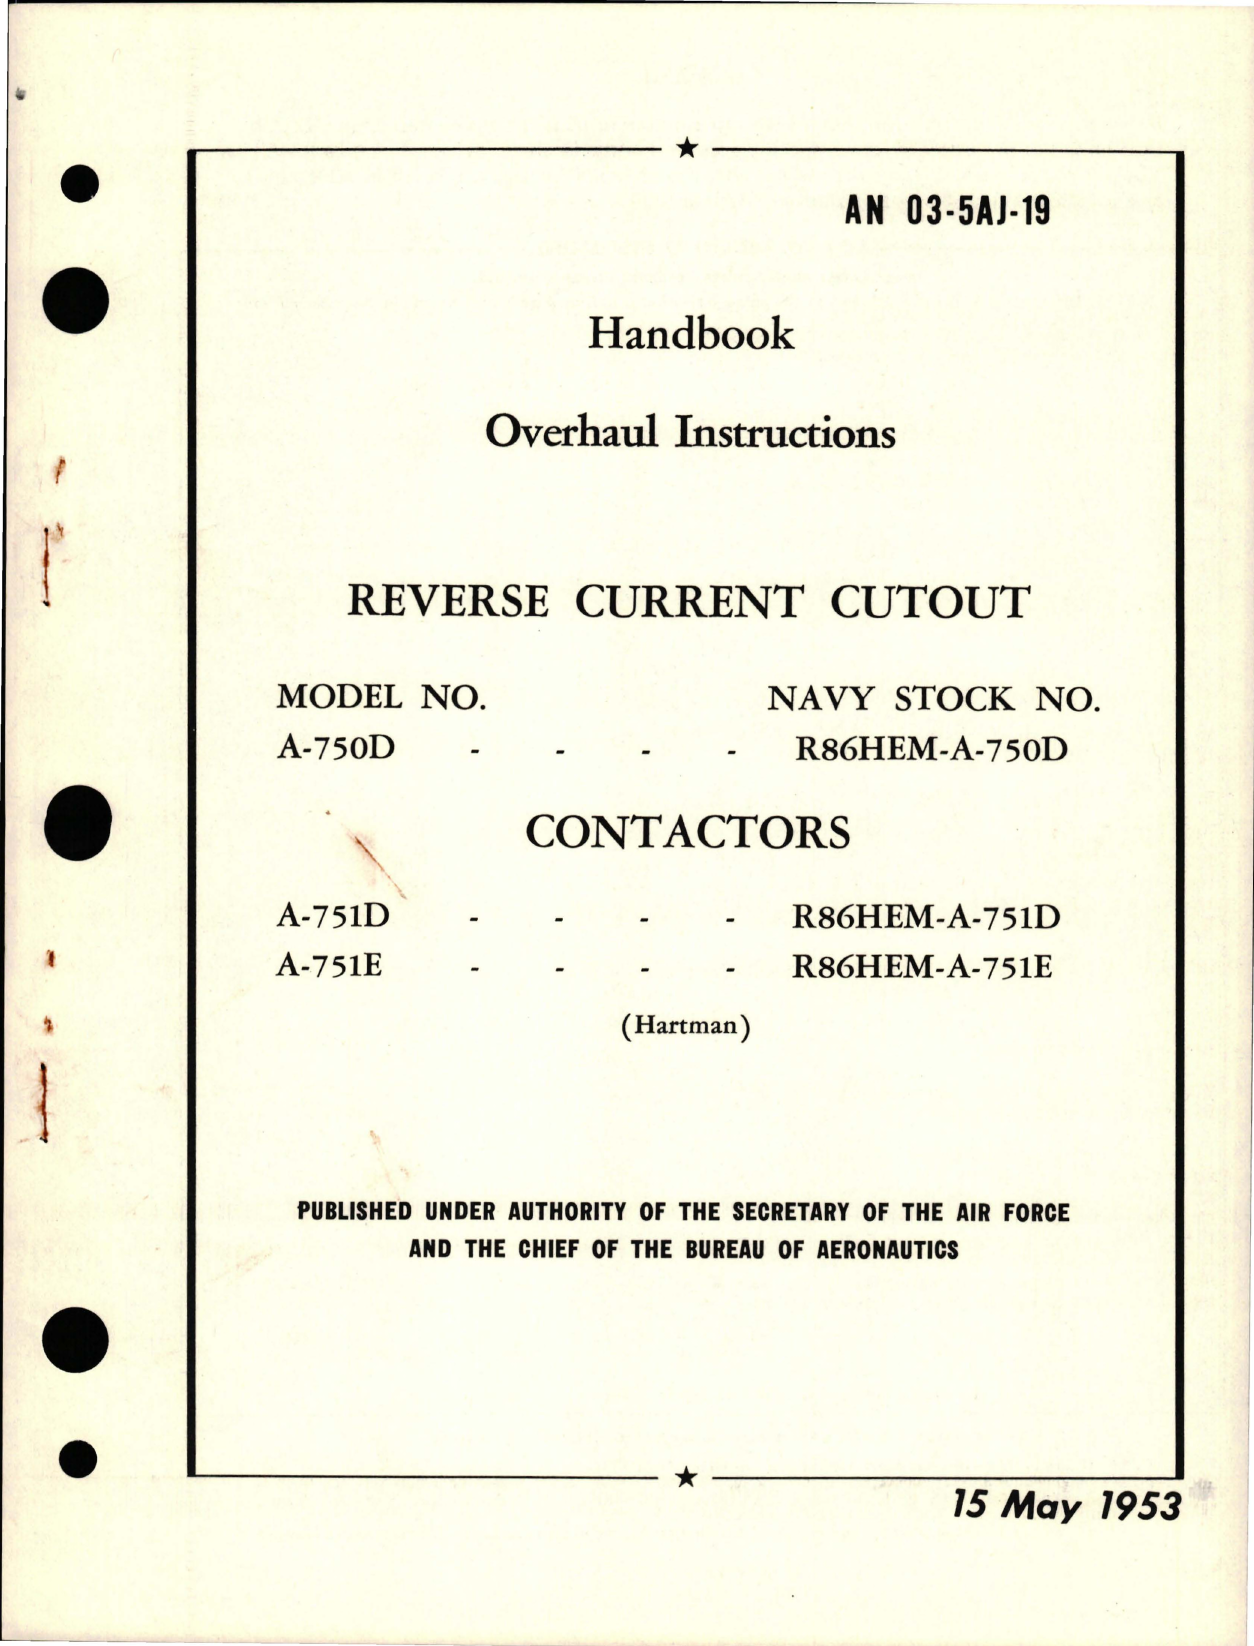 Sample page 1 from AirCorps Library document: Overhaul Instructions for Reverse Current Cutout - Model A-750D, Contractors - Models A-751D and A-751E